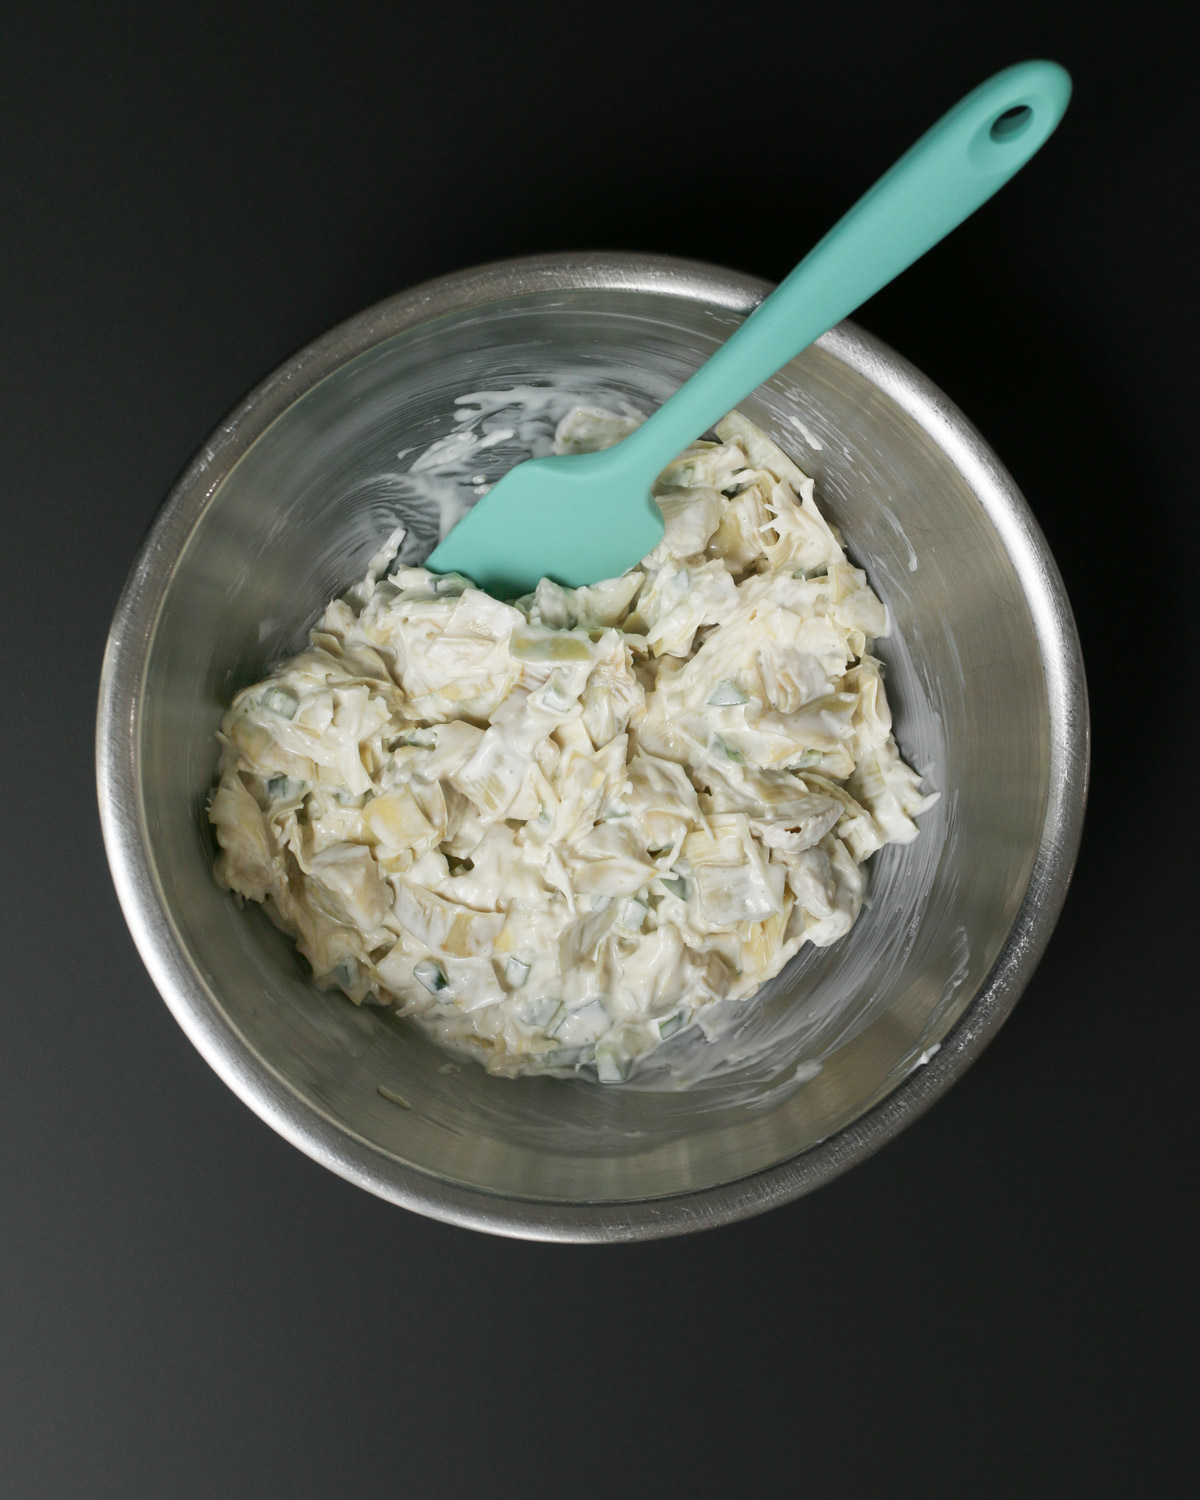 dip ingredients stirred together in the bowl with a teal spatula.